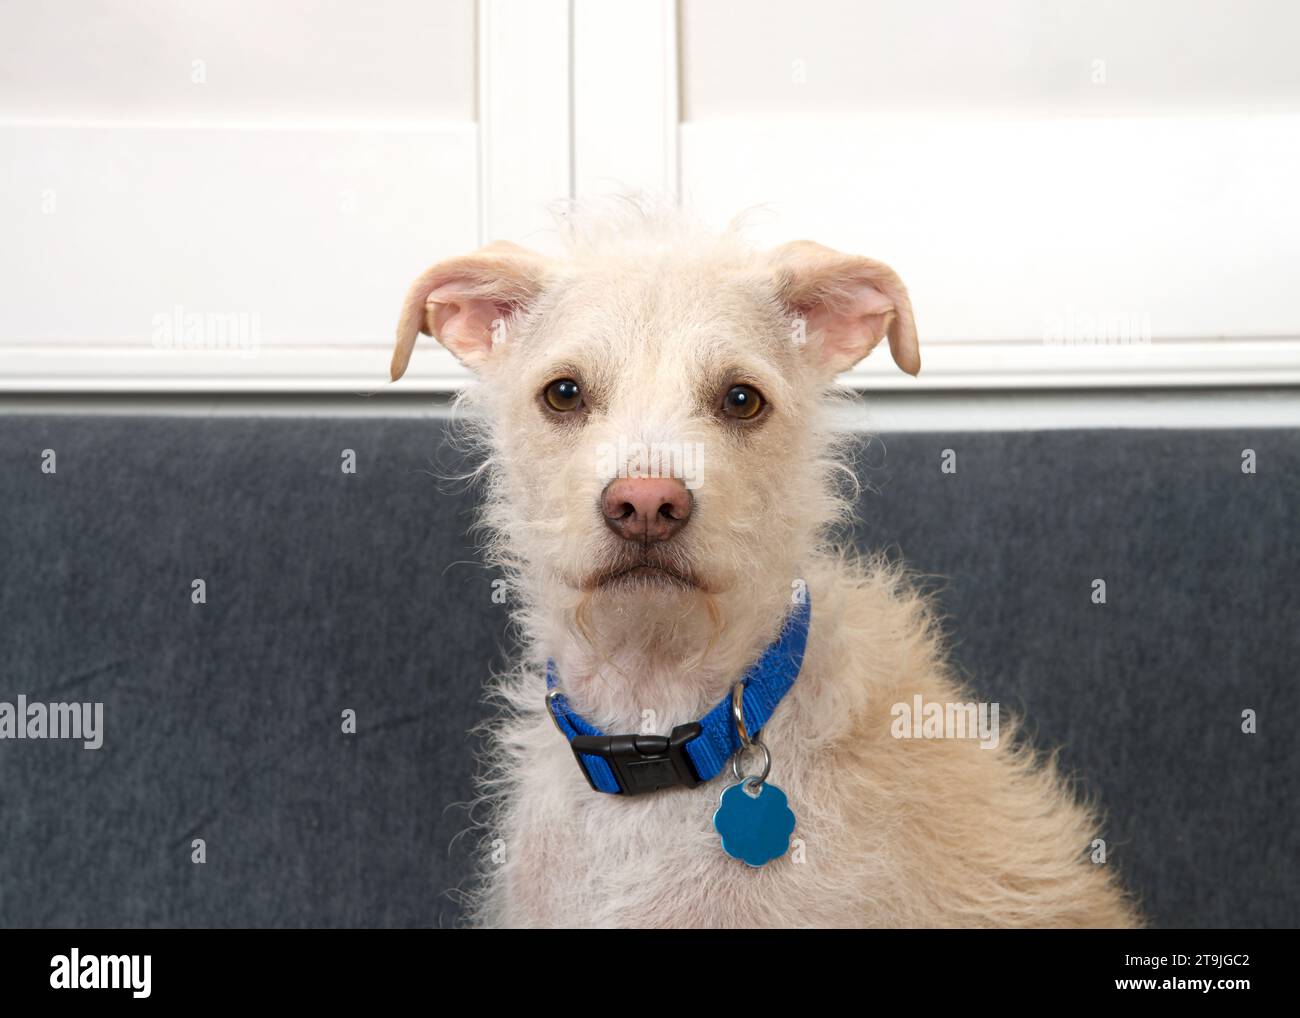 Portrait of an adorable Jack Russell Terrier mix puppy dog wearing a blue collar  looking directly at viewer. grey sofa and off white window shutters Stock Photo